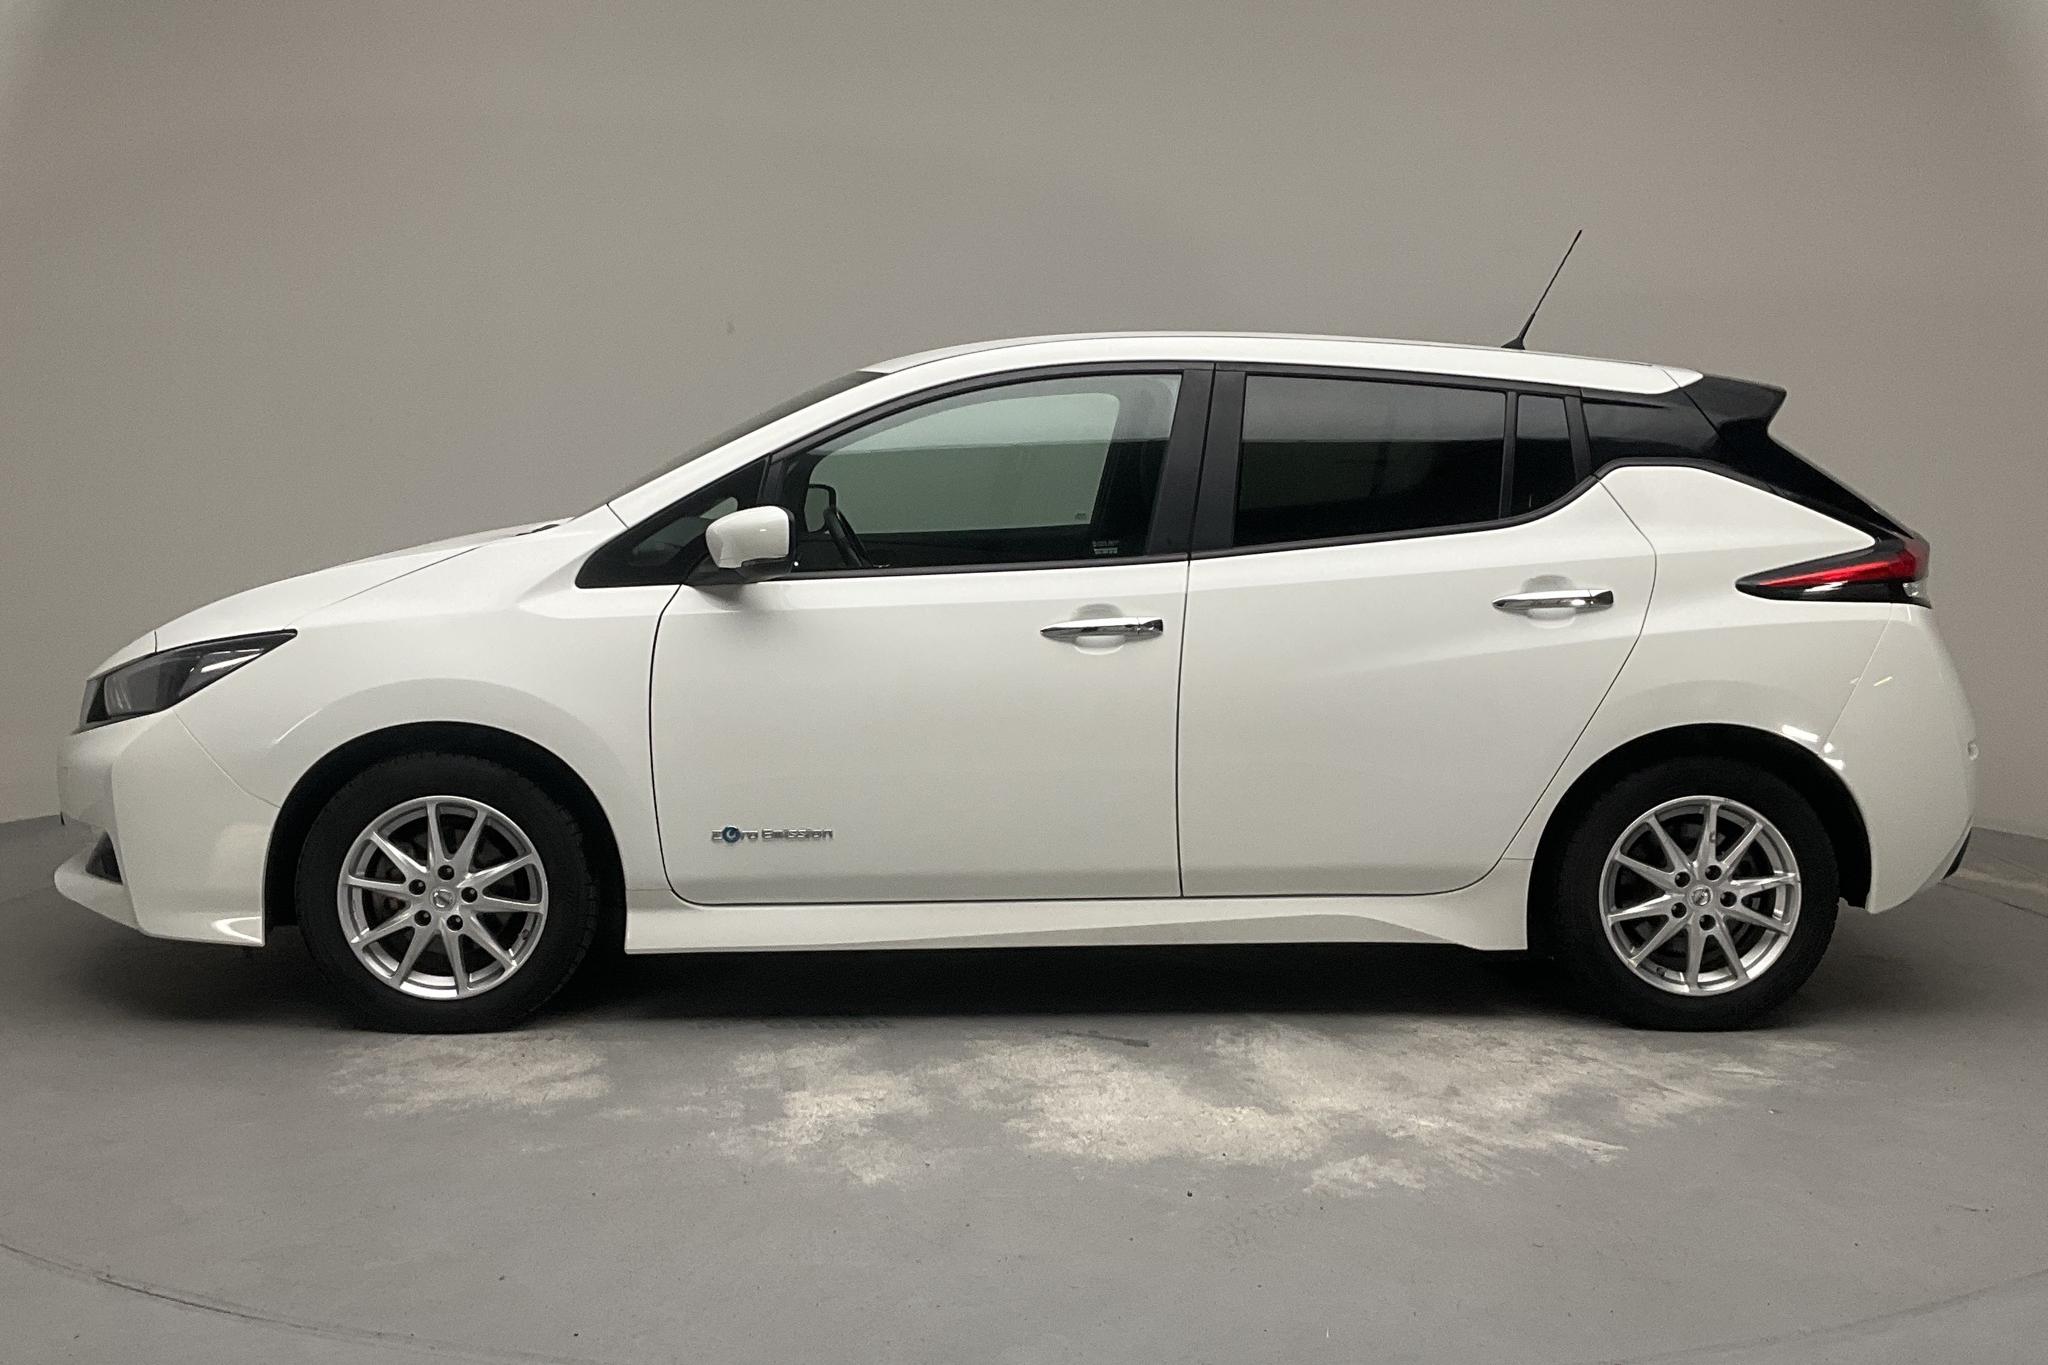 Nissan LEAF 5dr 39 kWh (150hk) - 71 960 km - Automatic - white - 2019